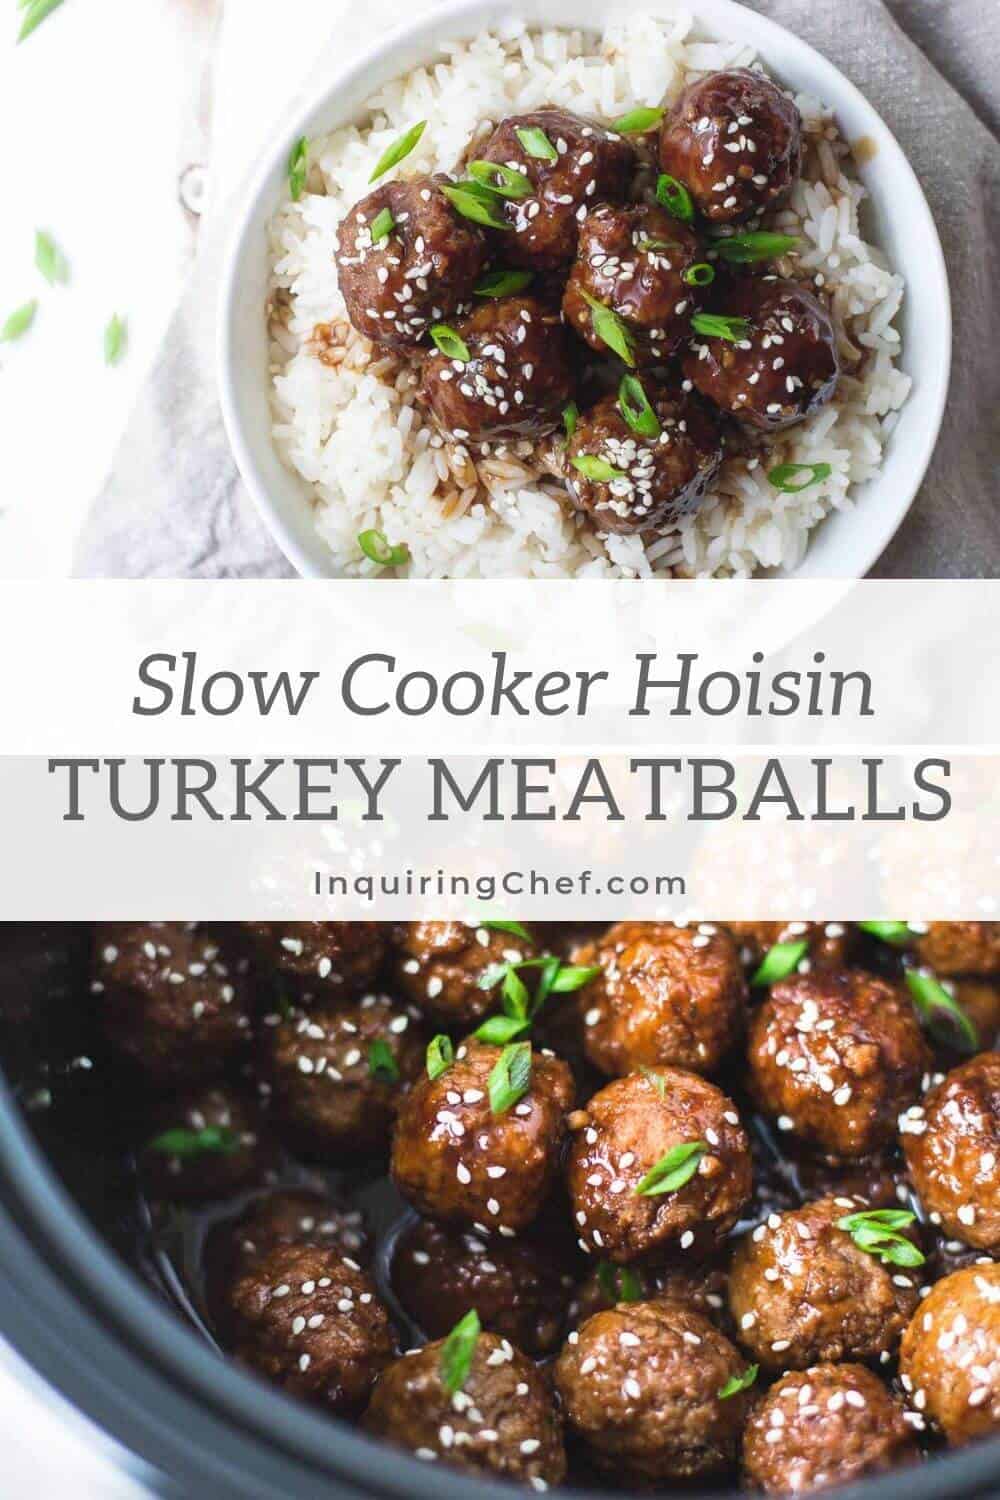 In search of super easy weeknight dinners, Slow-Cooker Hoisin Turkey Meatballs have jumped to the top of my list. Tender meatballs simmer slowly in a sweet and savory sauce and come in at under 300 calories per serving. Add rice and steamed broccoli or green beans and dinner is served!